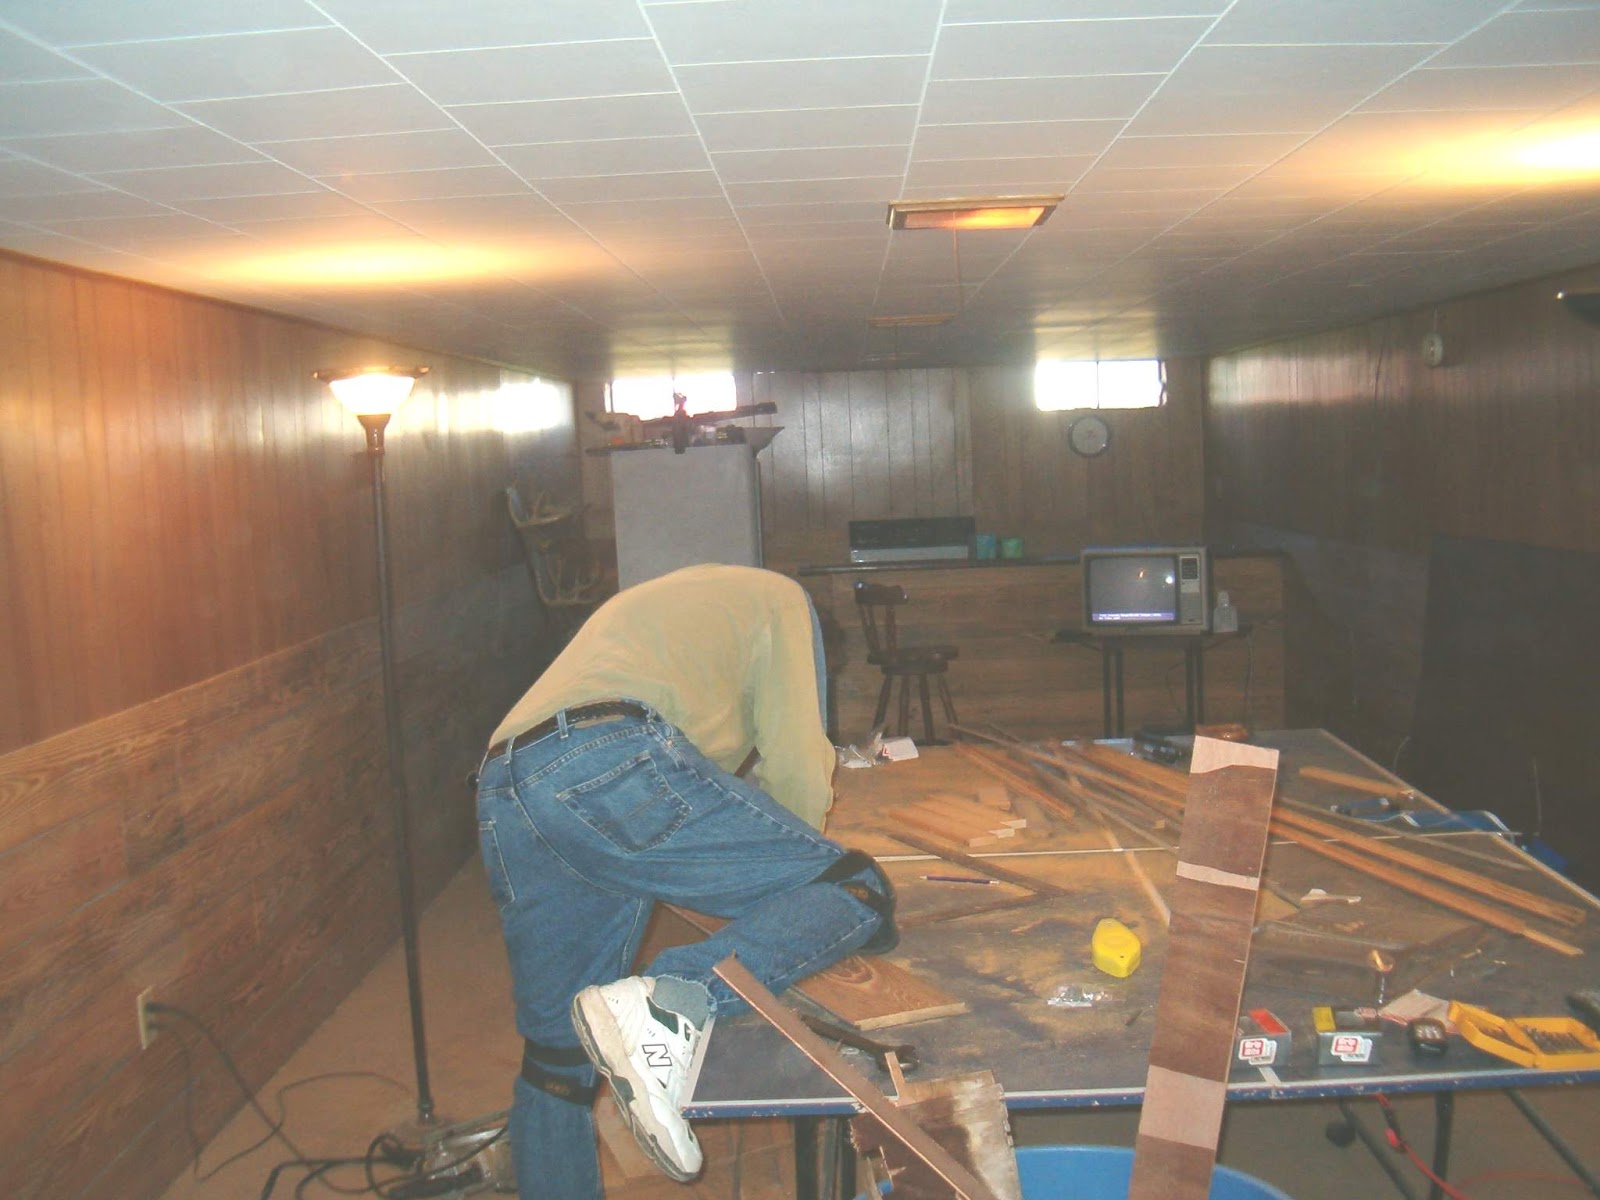 We decided to cover the bottom half of the paneling with barn wood.